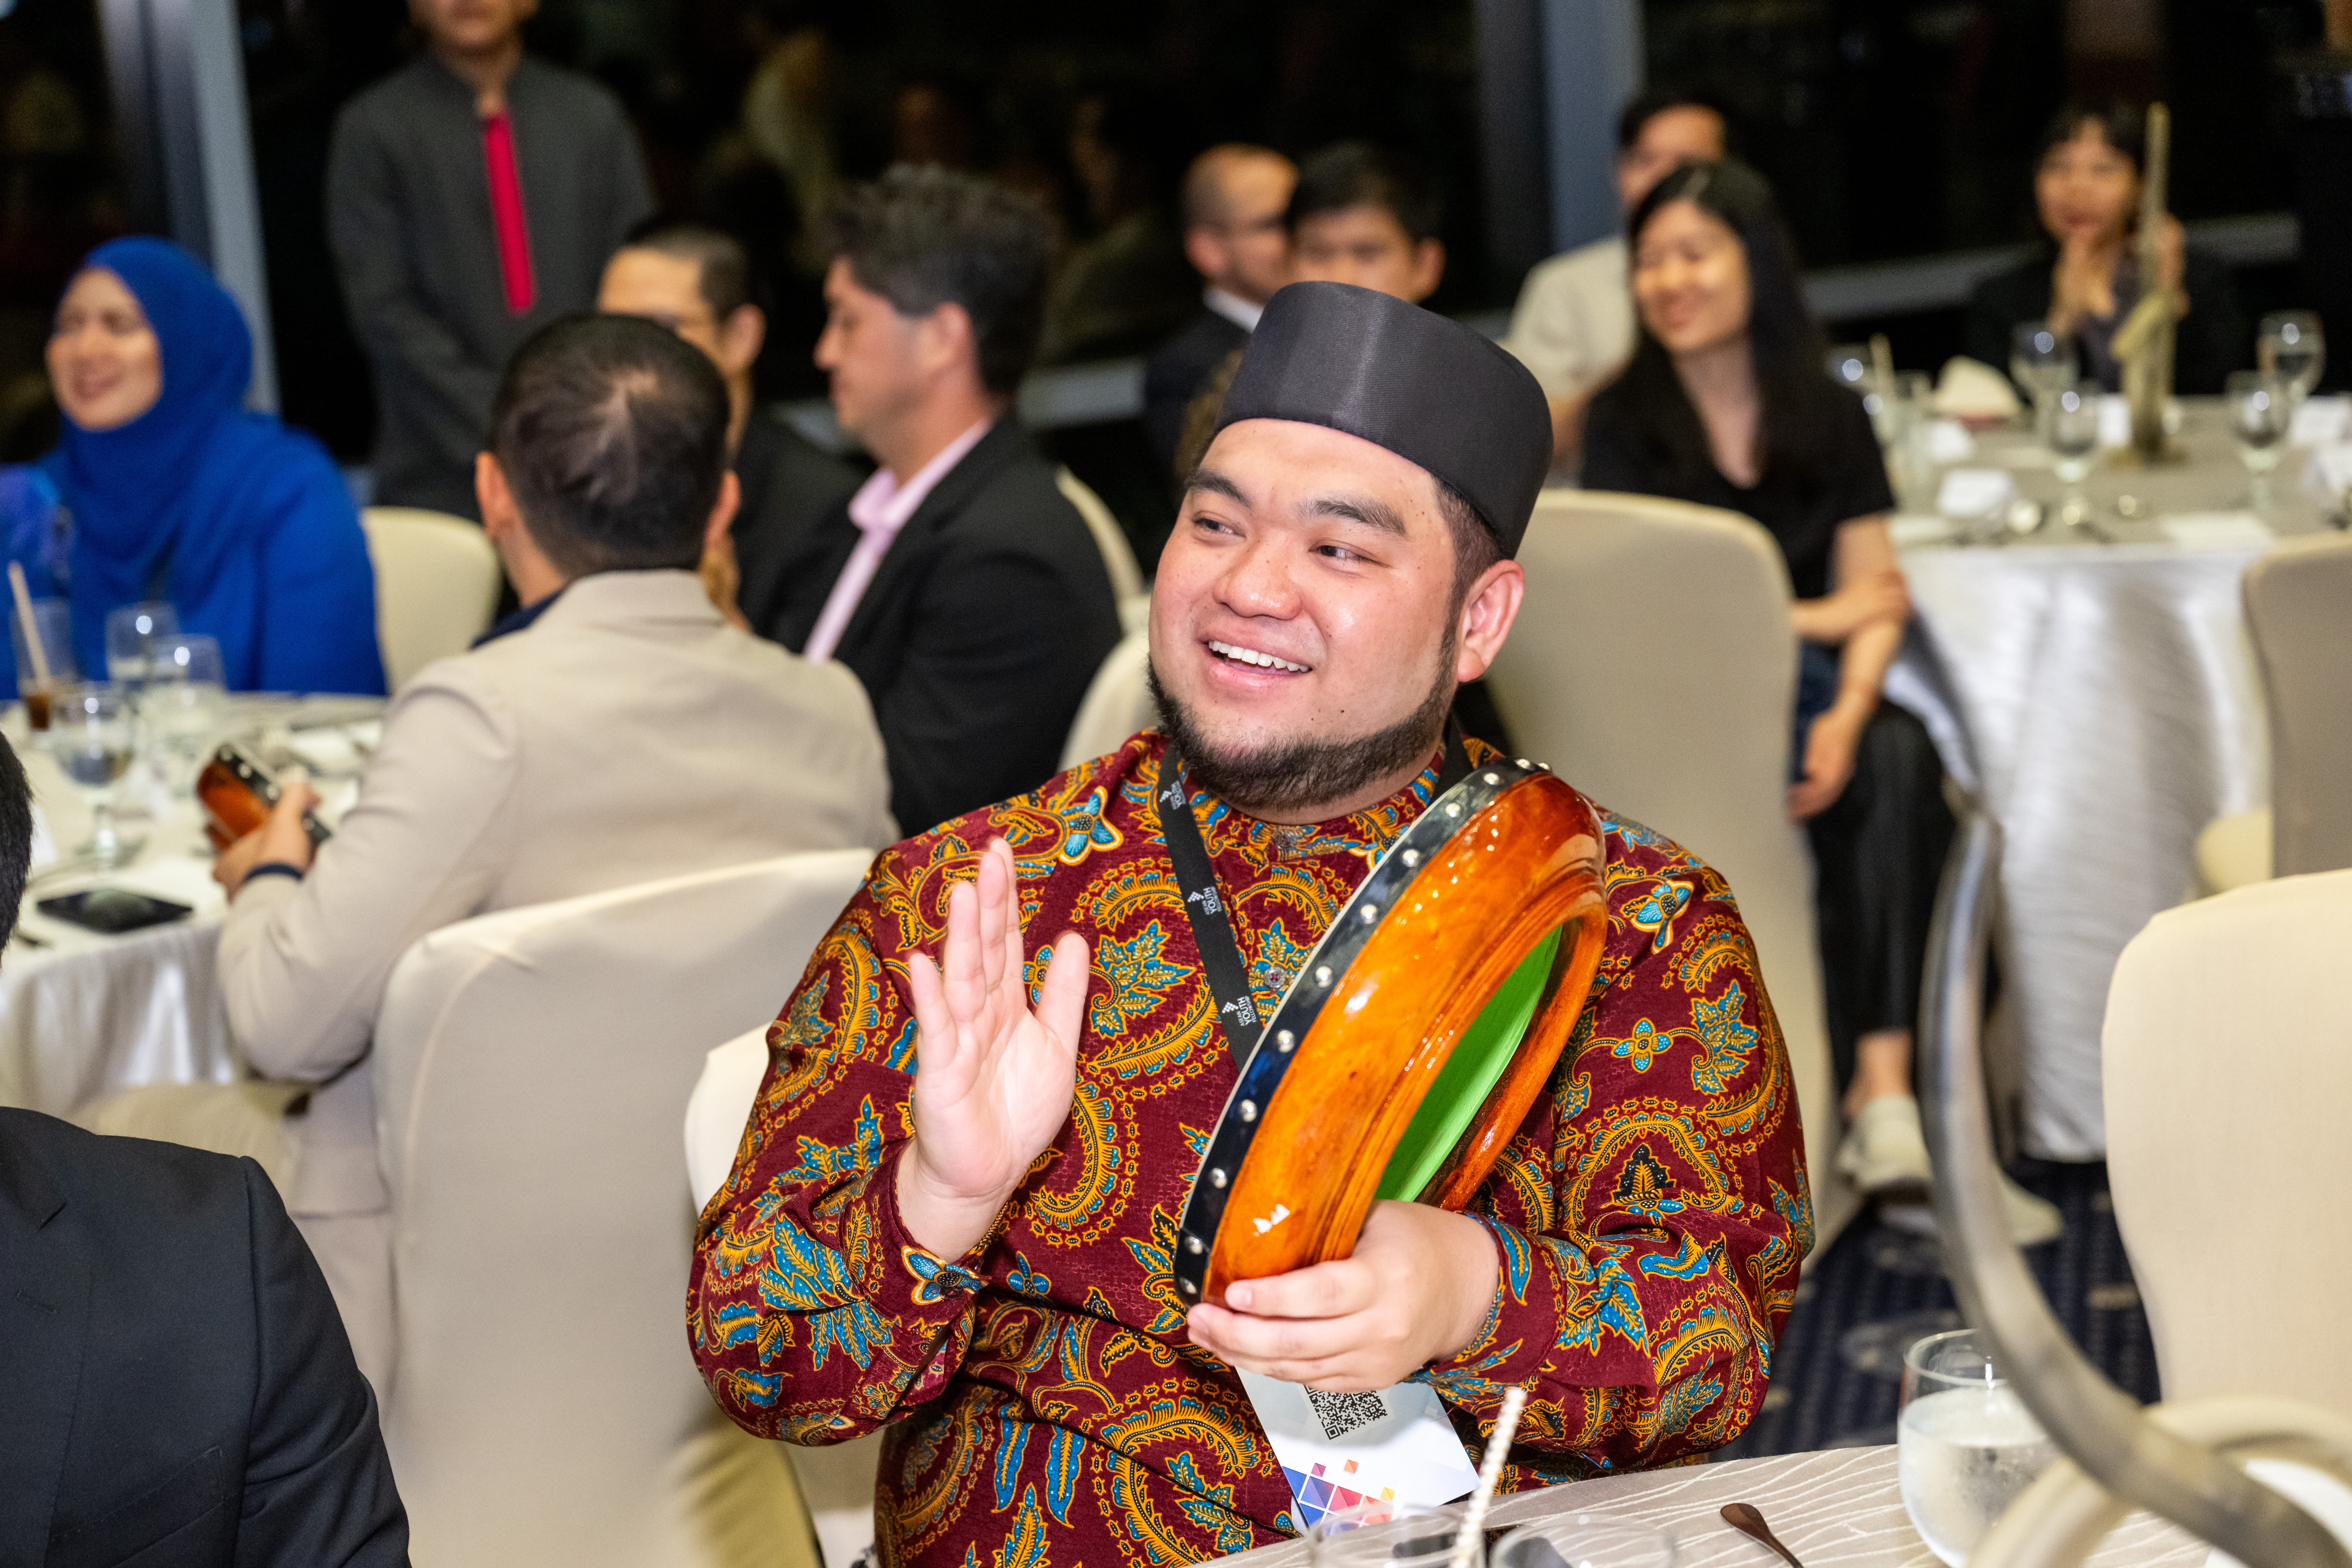 A Bruneian Fellow playing the kompang as part of the welcome dinner's opening performance